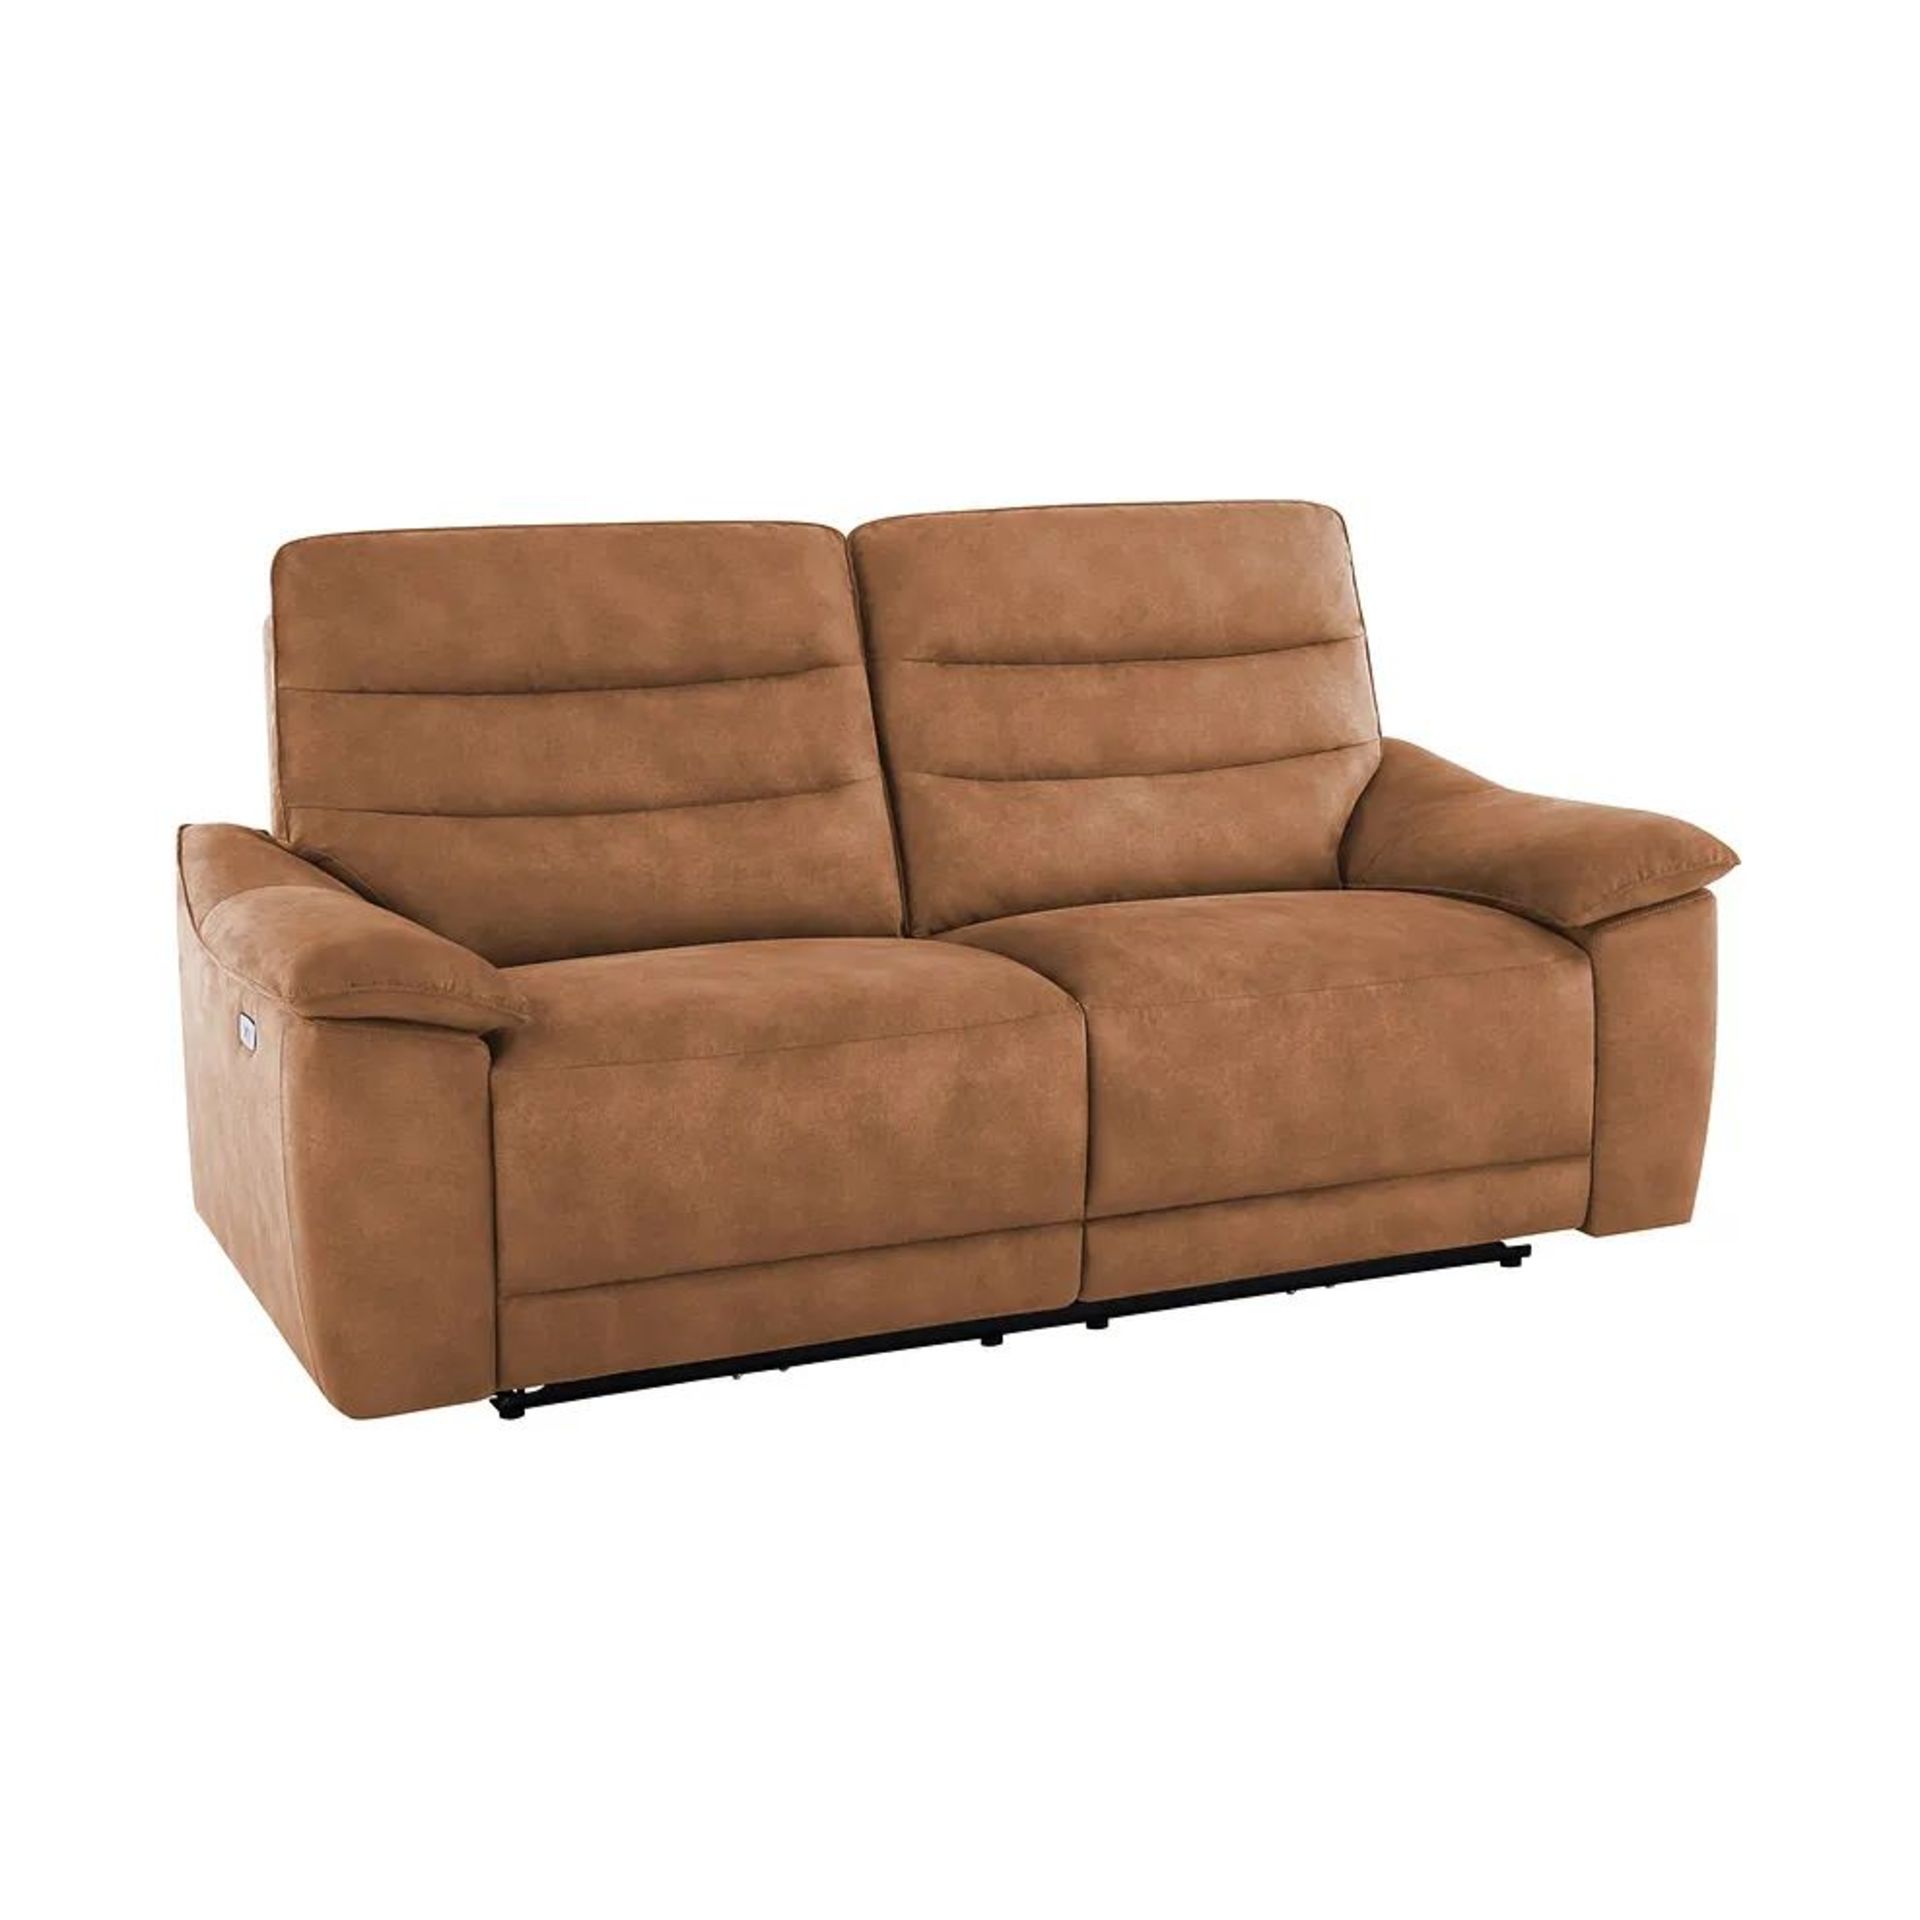 BRAND NEW CARTER 3 Seater Electric Recliner Sofa - BROWN FABRIC. RRP £1299. Shown here in Ranch